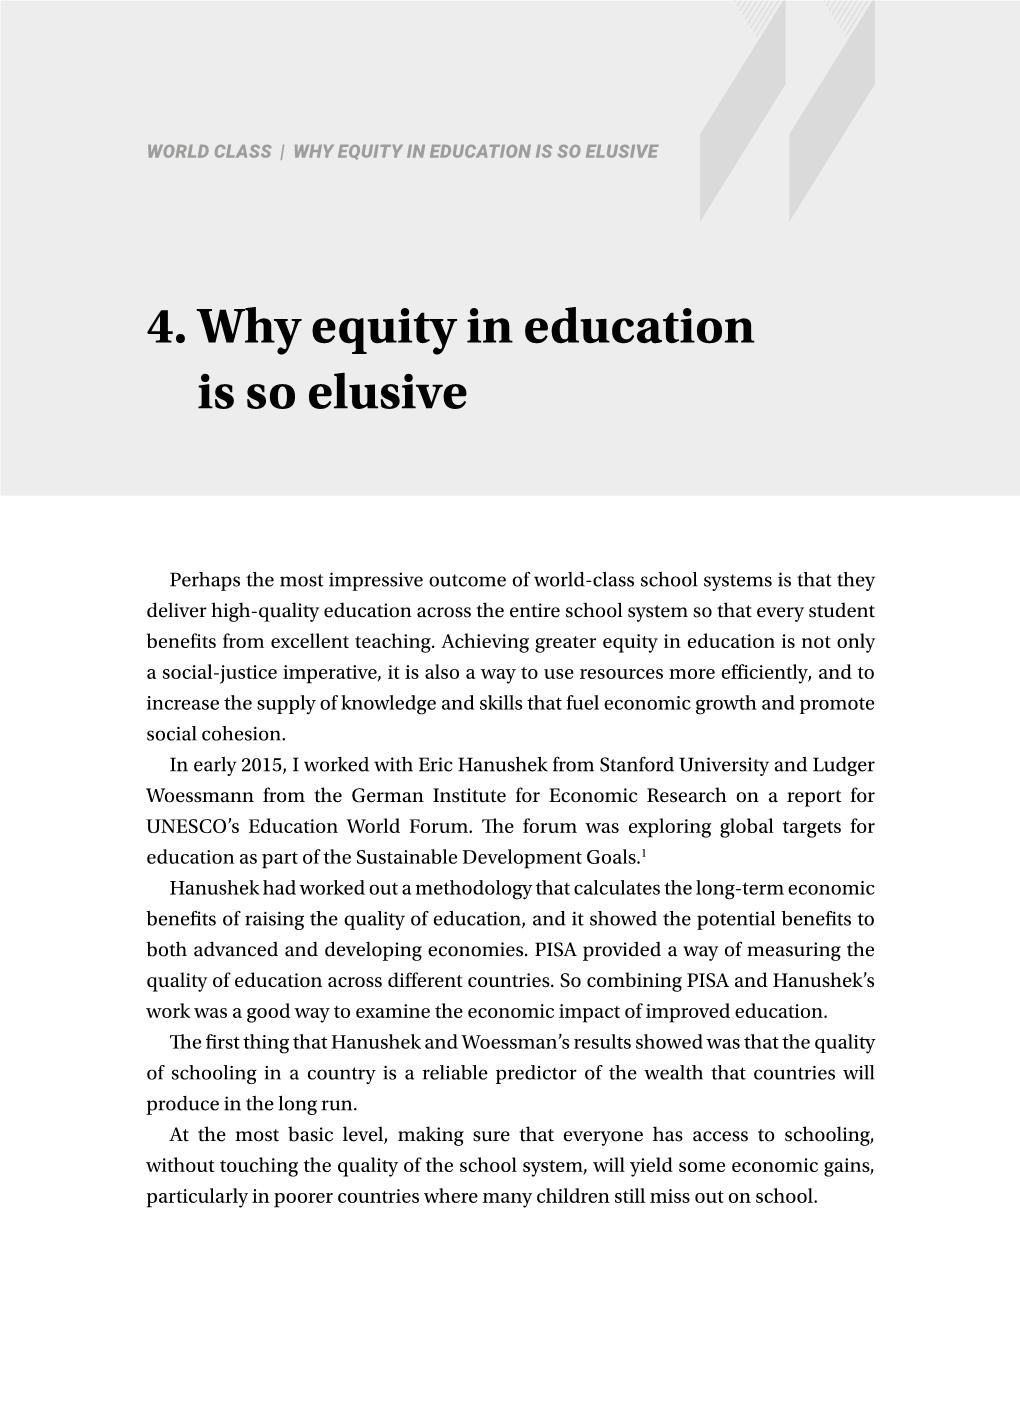 4. Why Equity in Education Is So Elusive